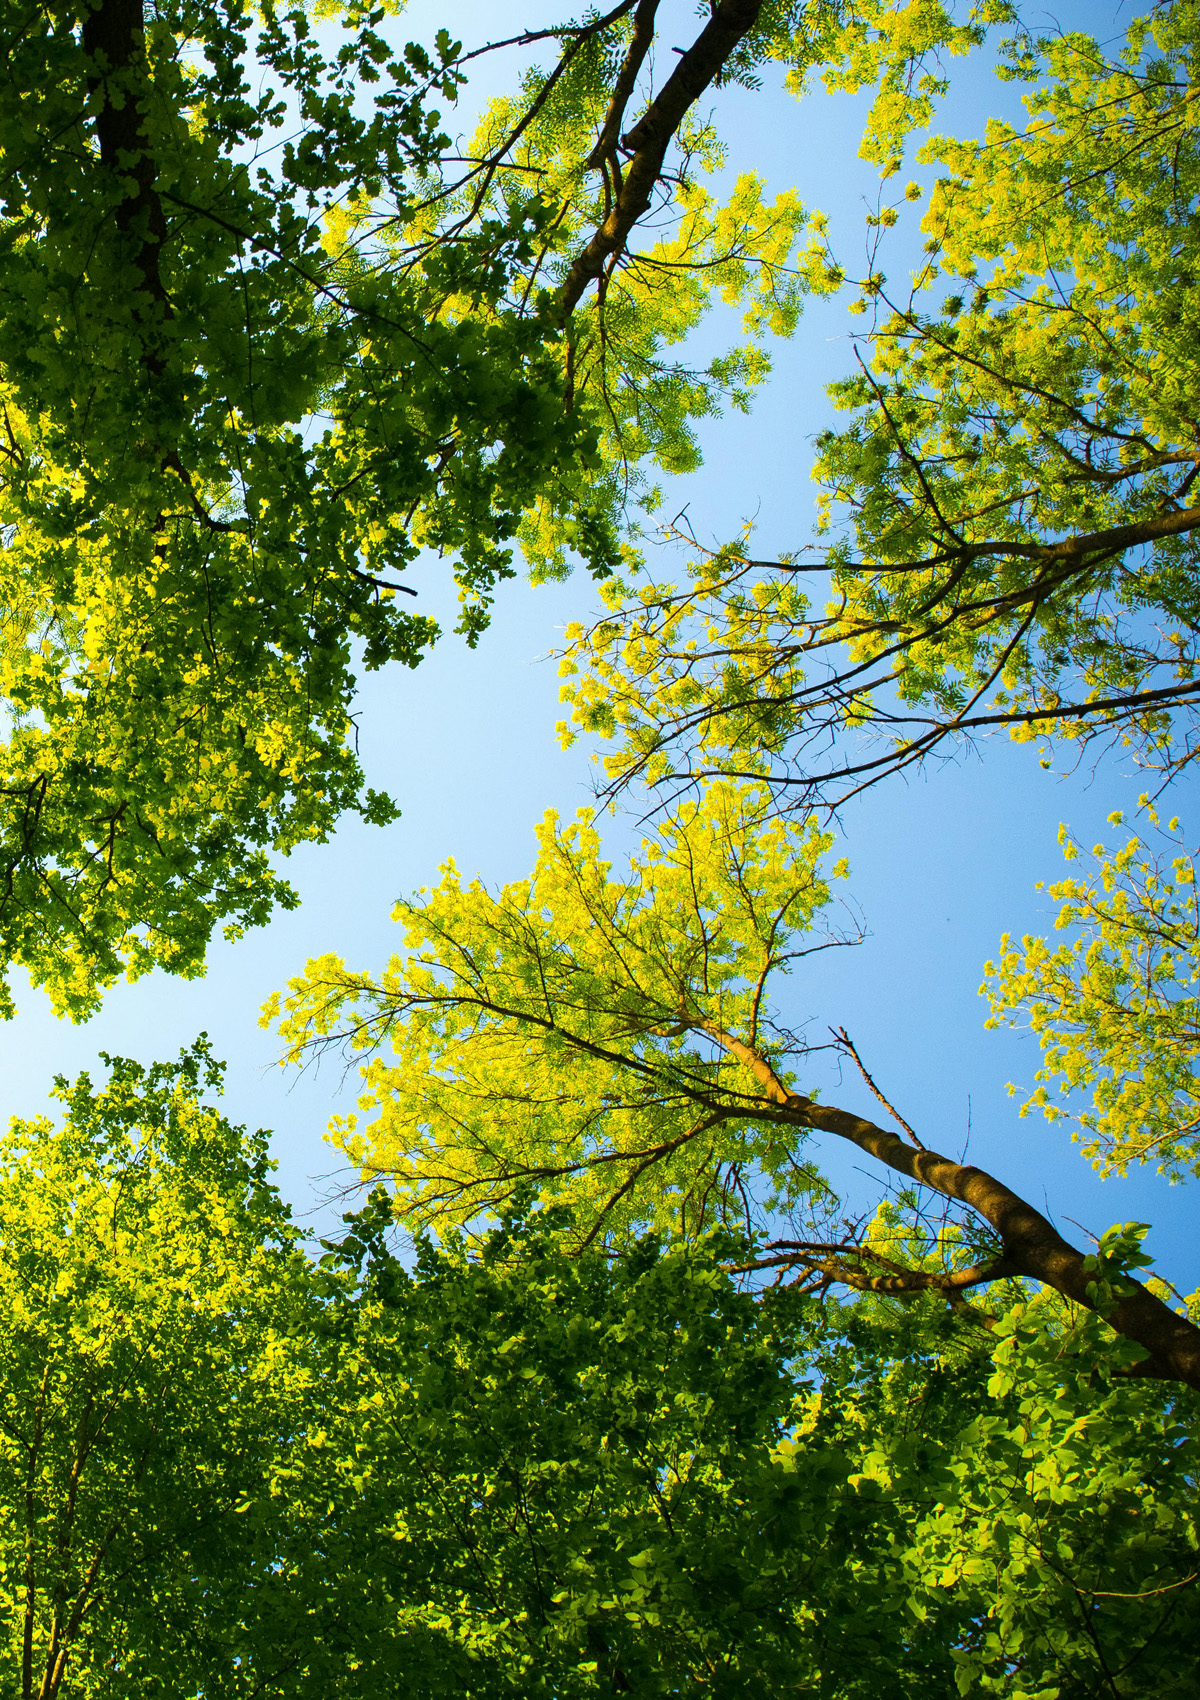 Green trees seen from the ground